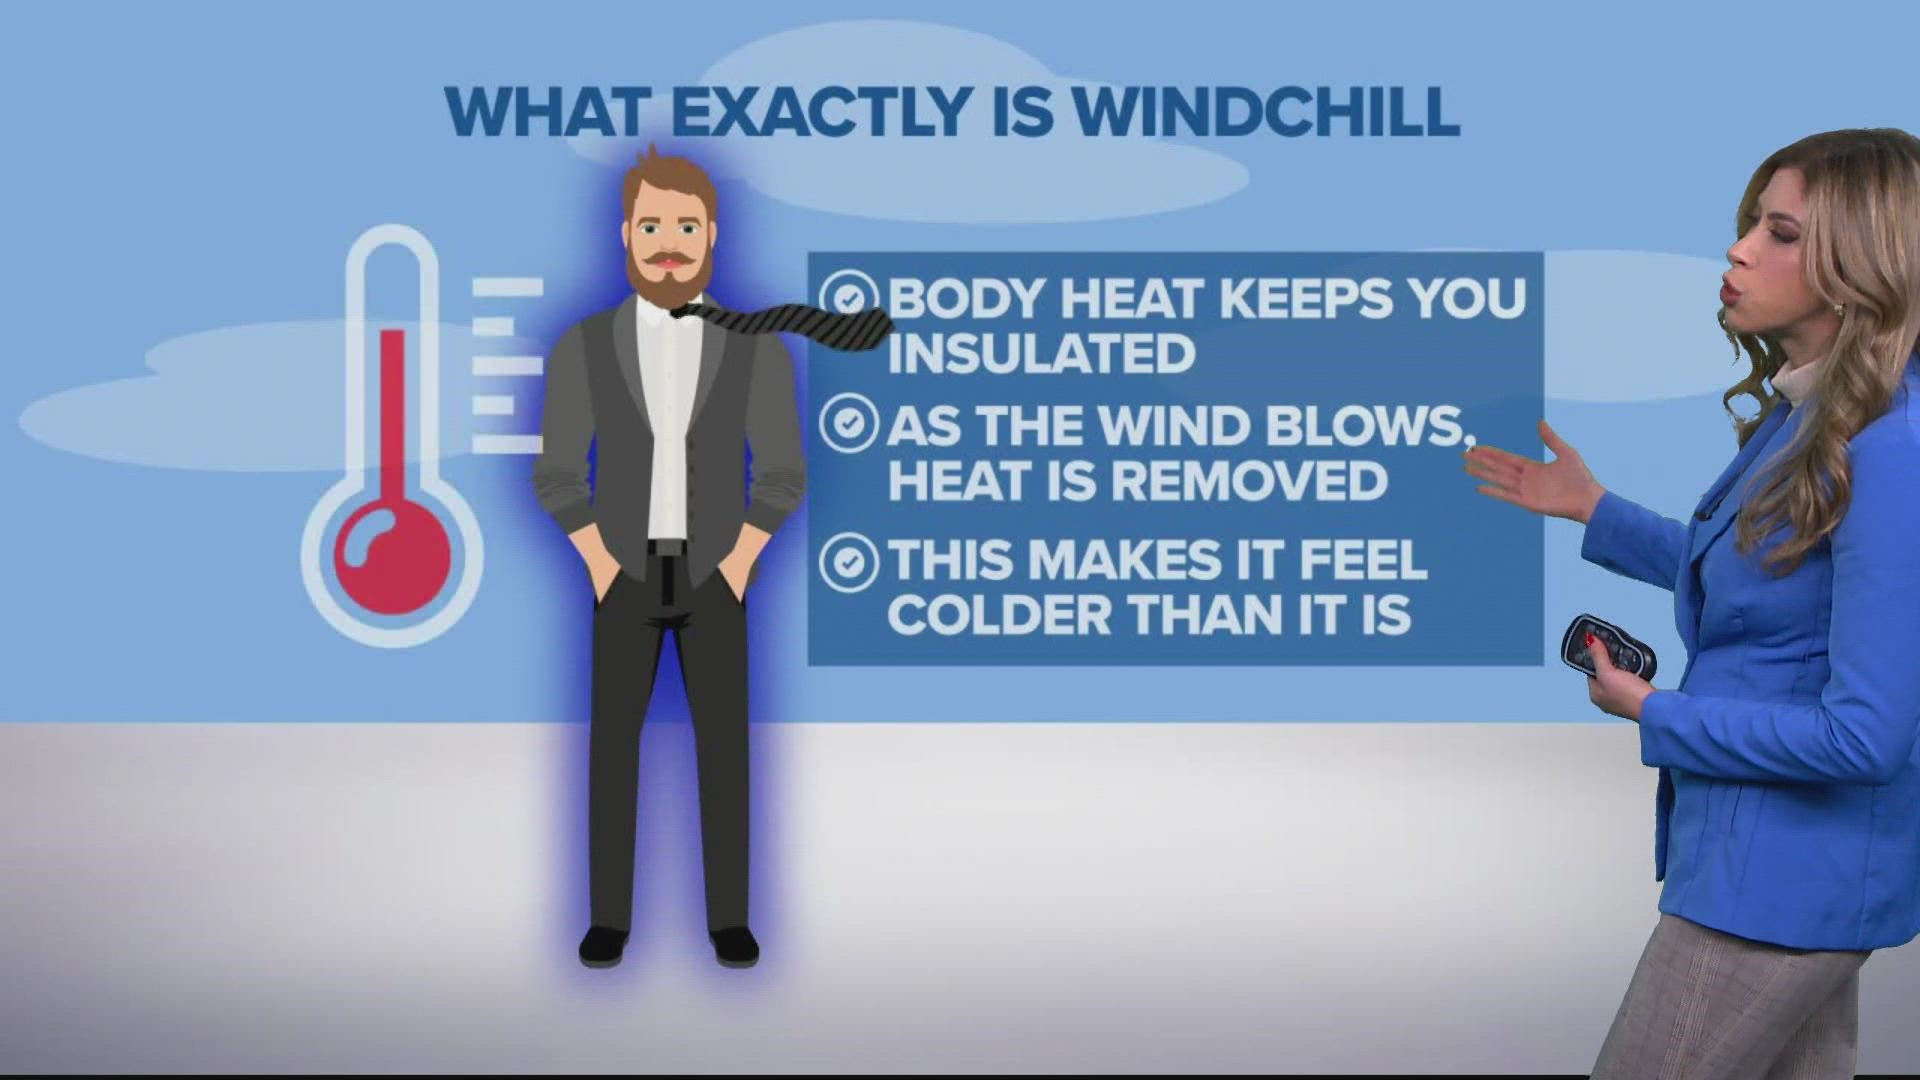 Wind chill makes the temperature feel a lot colder than what it really is.